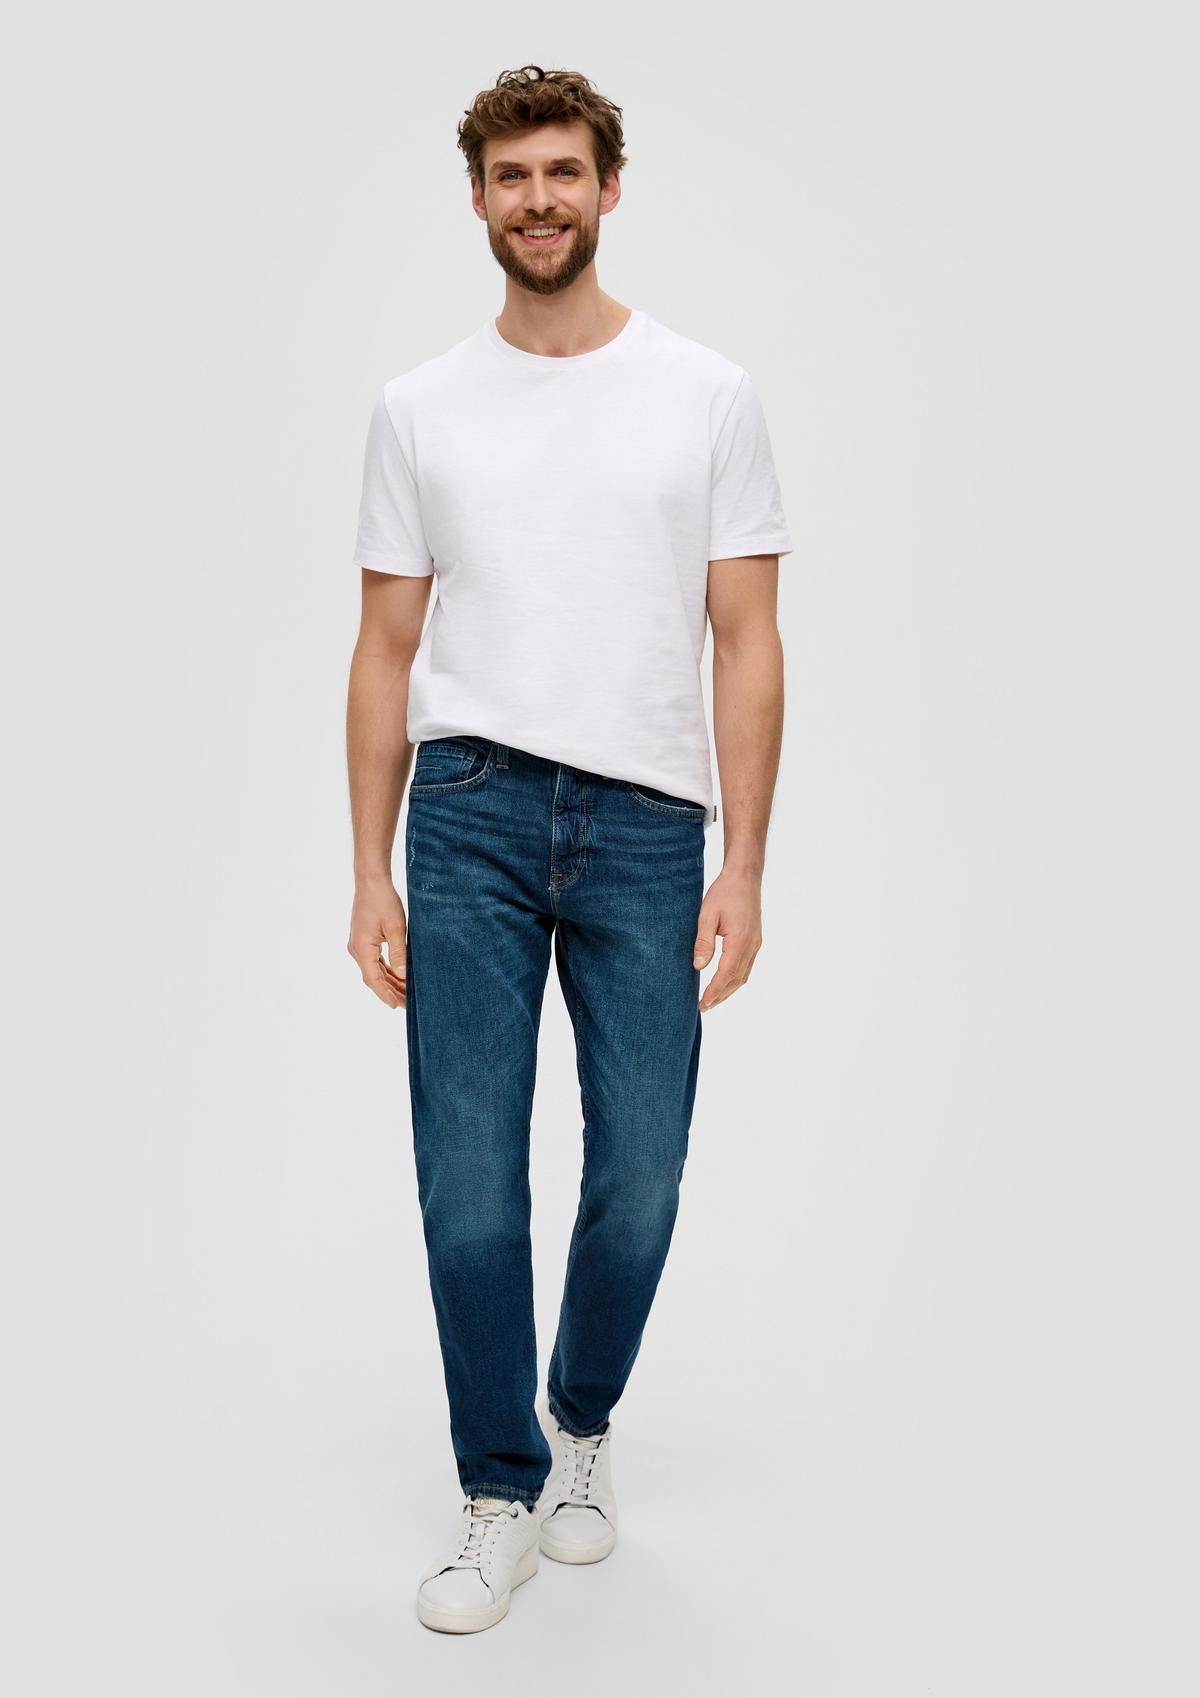 Jeans / regular fit / high rise / tapered leg